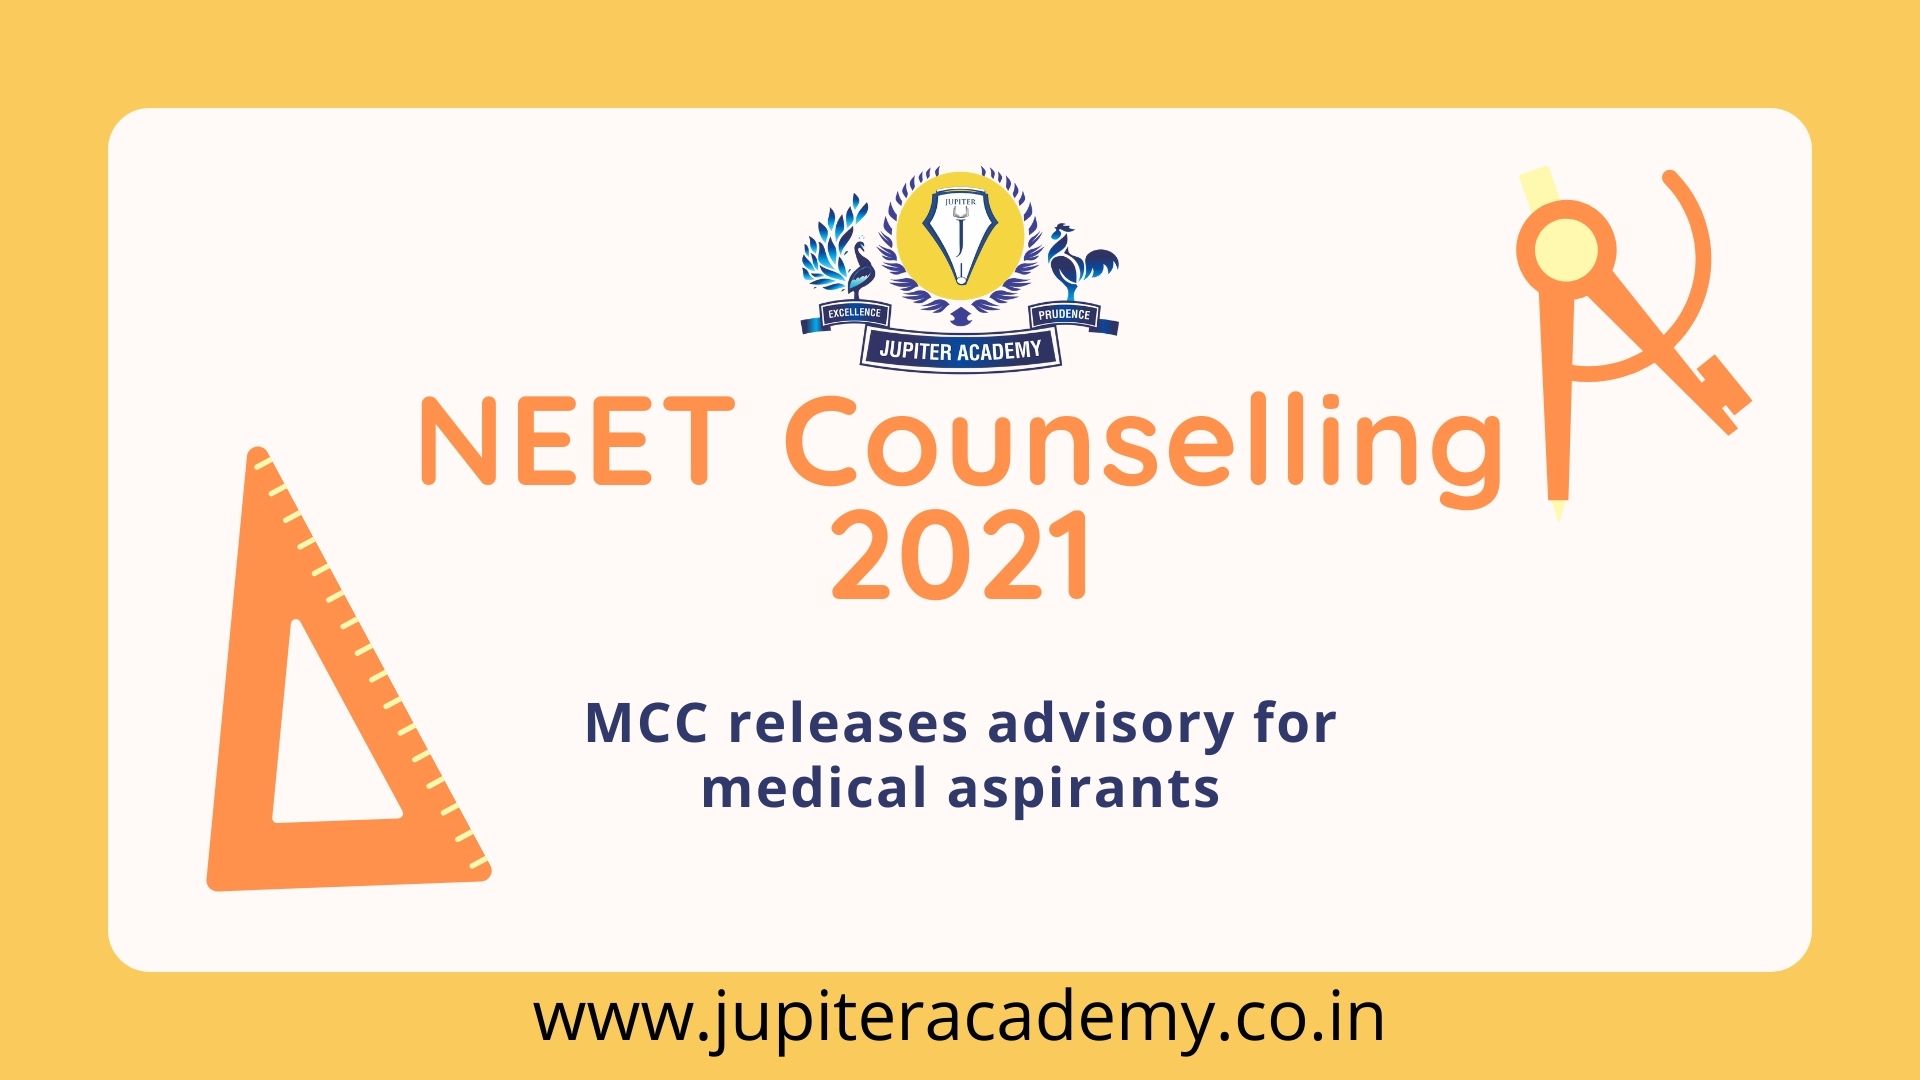 You are currently viewing NEET Counselling 2021 : MCC releases advisory for medical aspirants